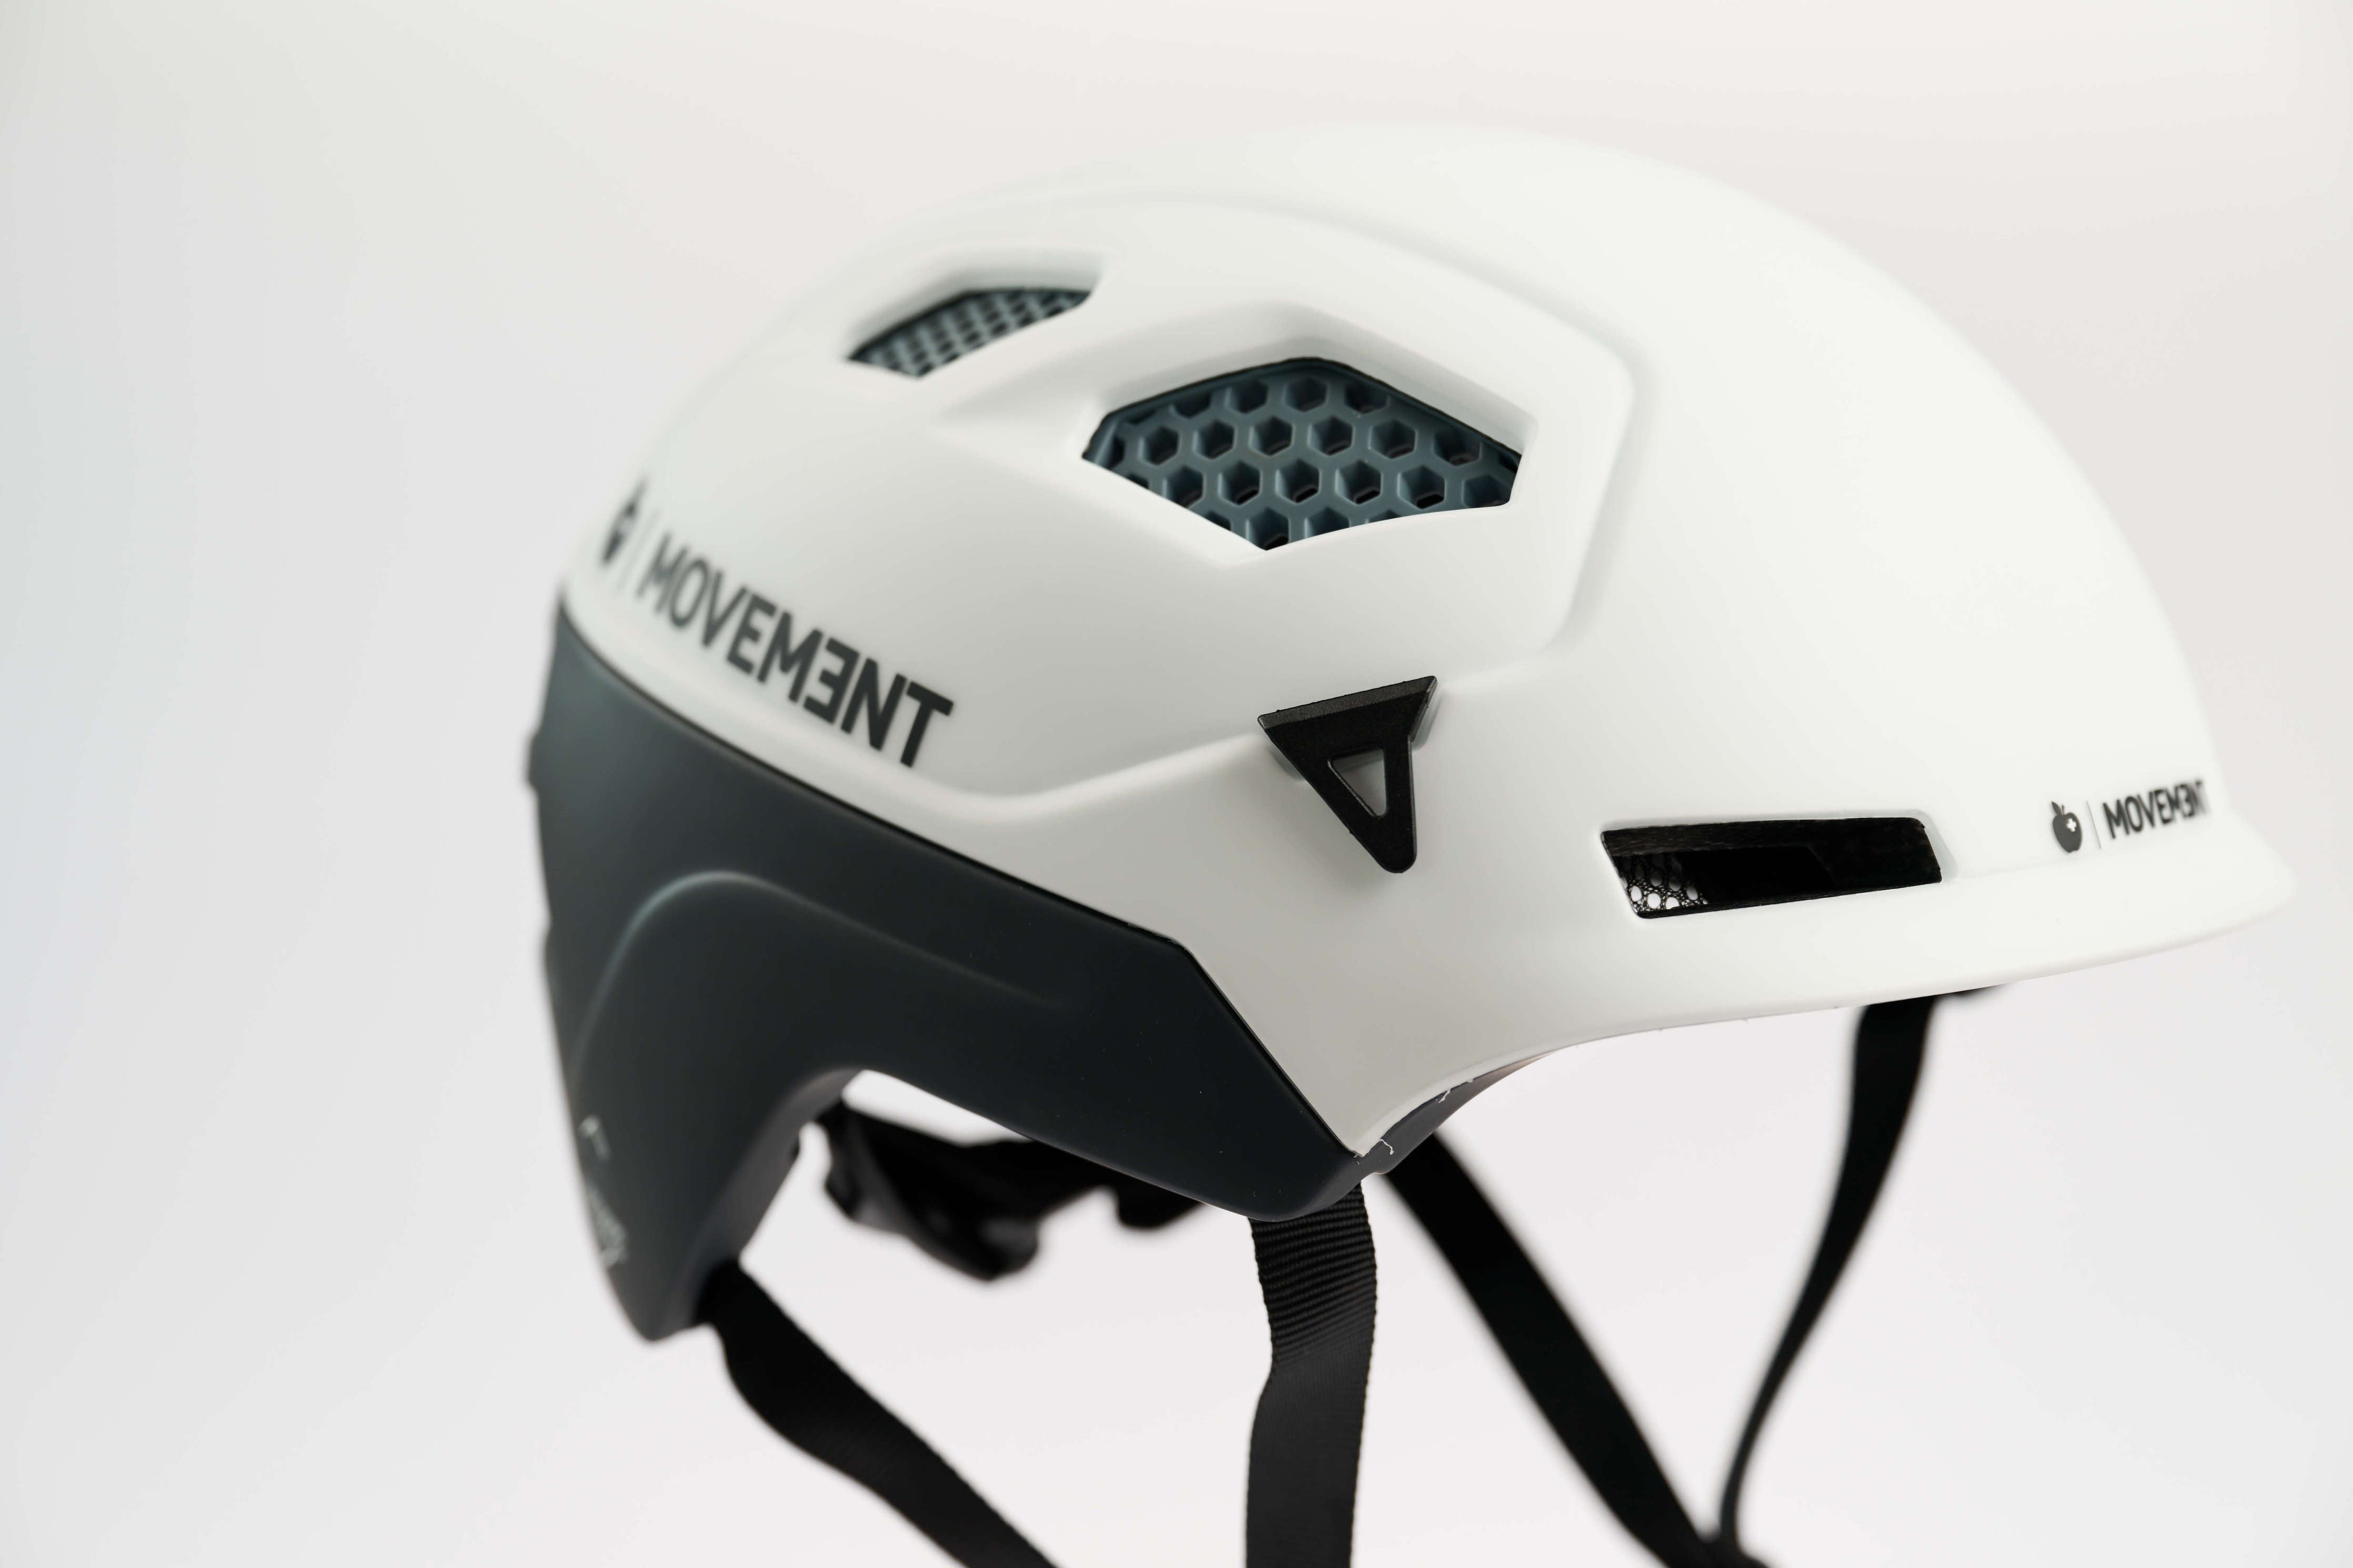 Get a glimpse of the precision engineering in the Movement 3Tech Alpi helmet.